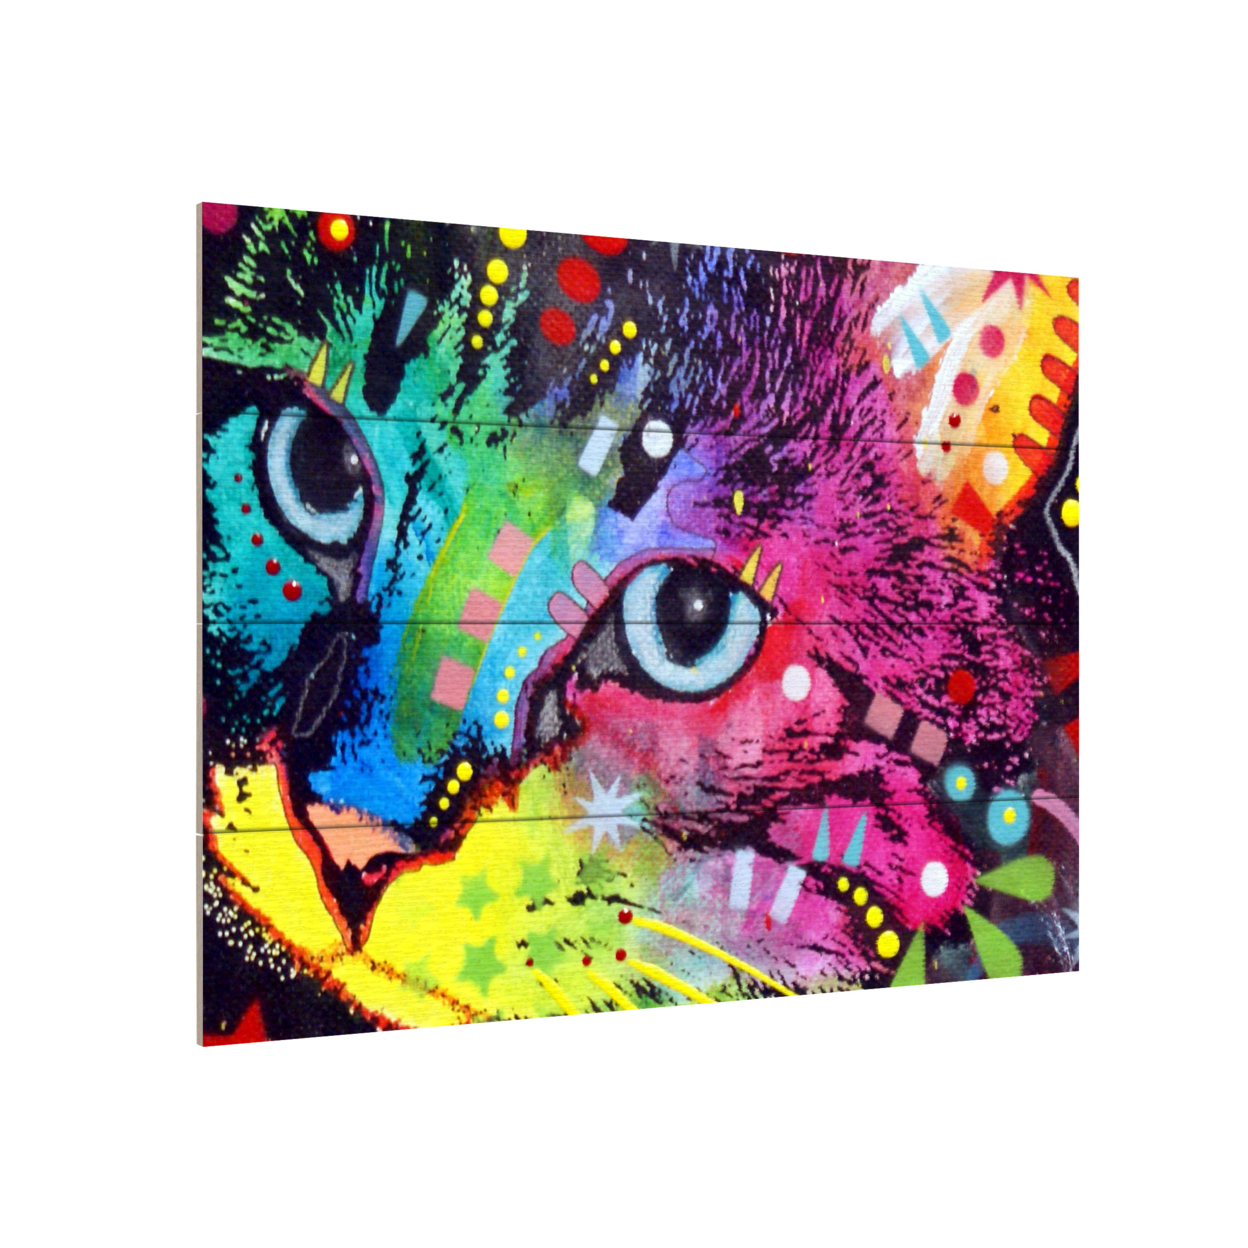 Wall Art 12 X 16 Inches Titled Thinking Cat Crowned Ready To Hang Printed On Wooden Planks